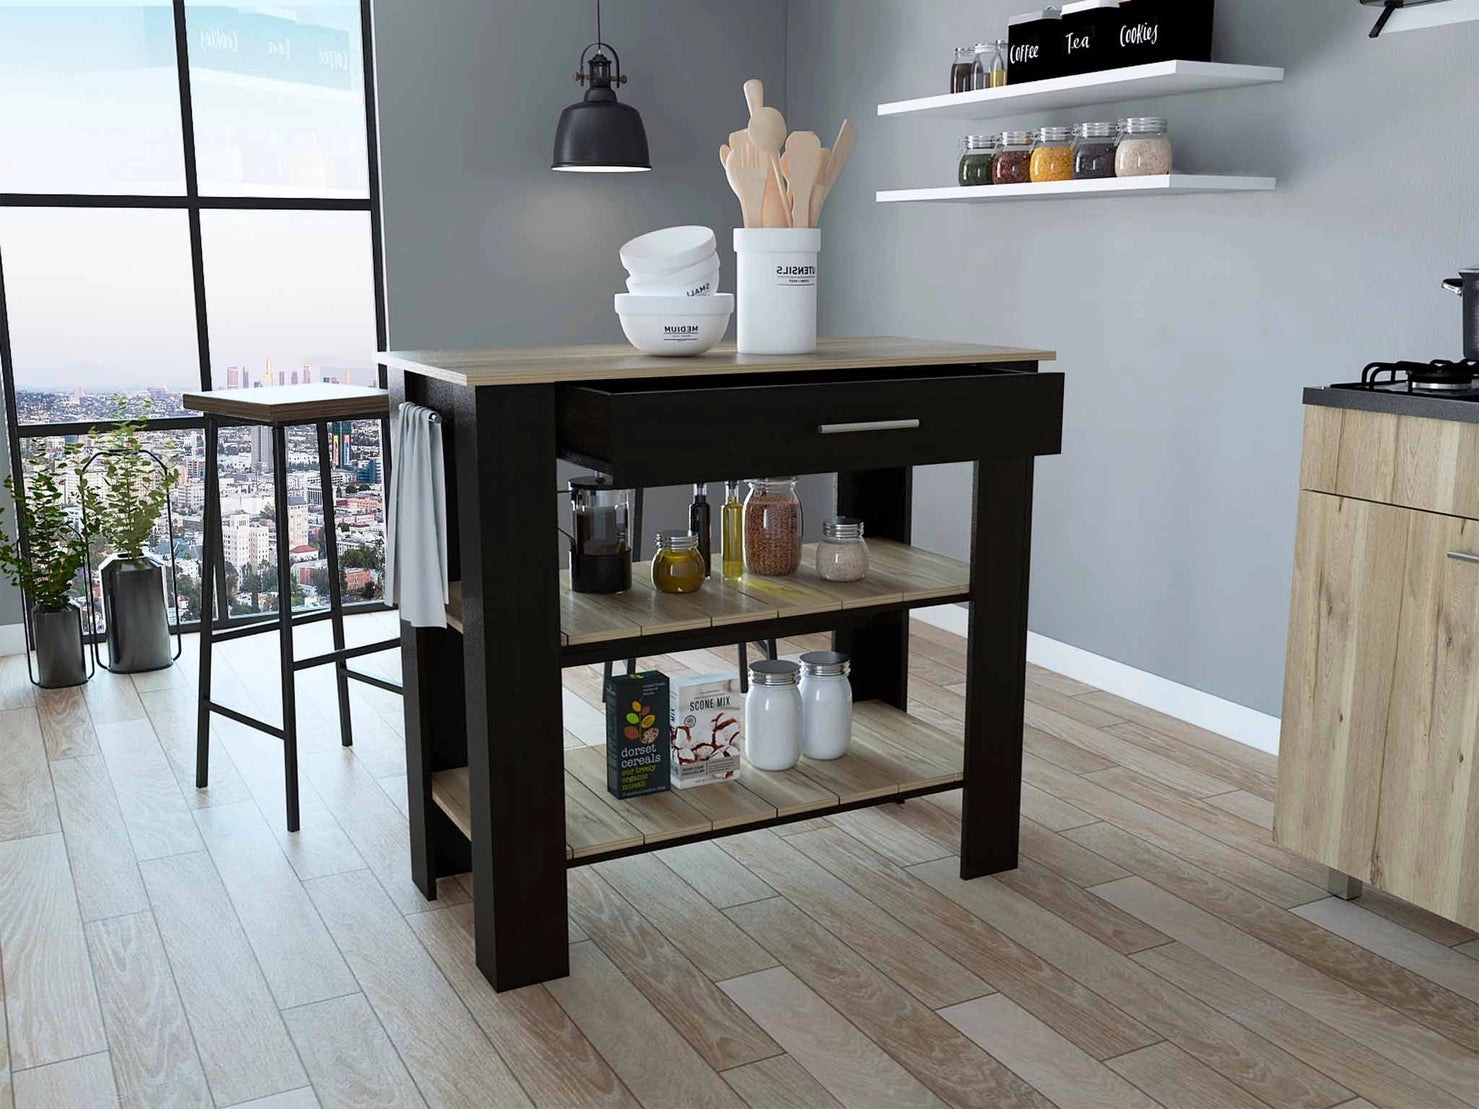 Light Oak and Black Kitchen Island with Two Open Shelves